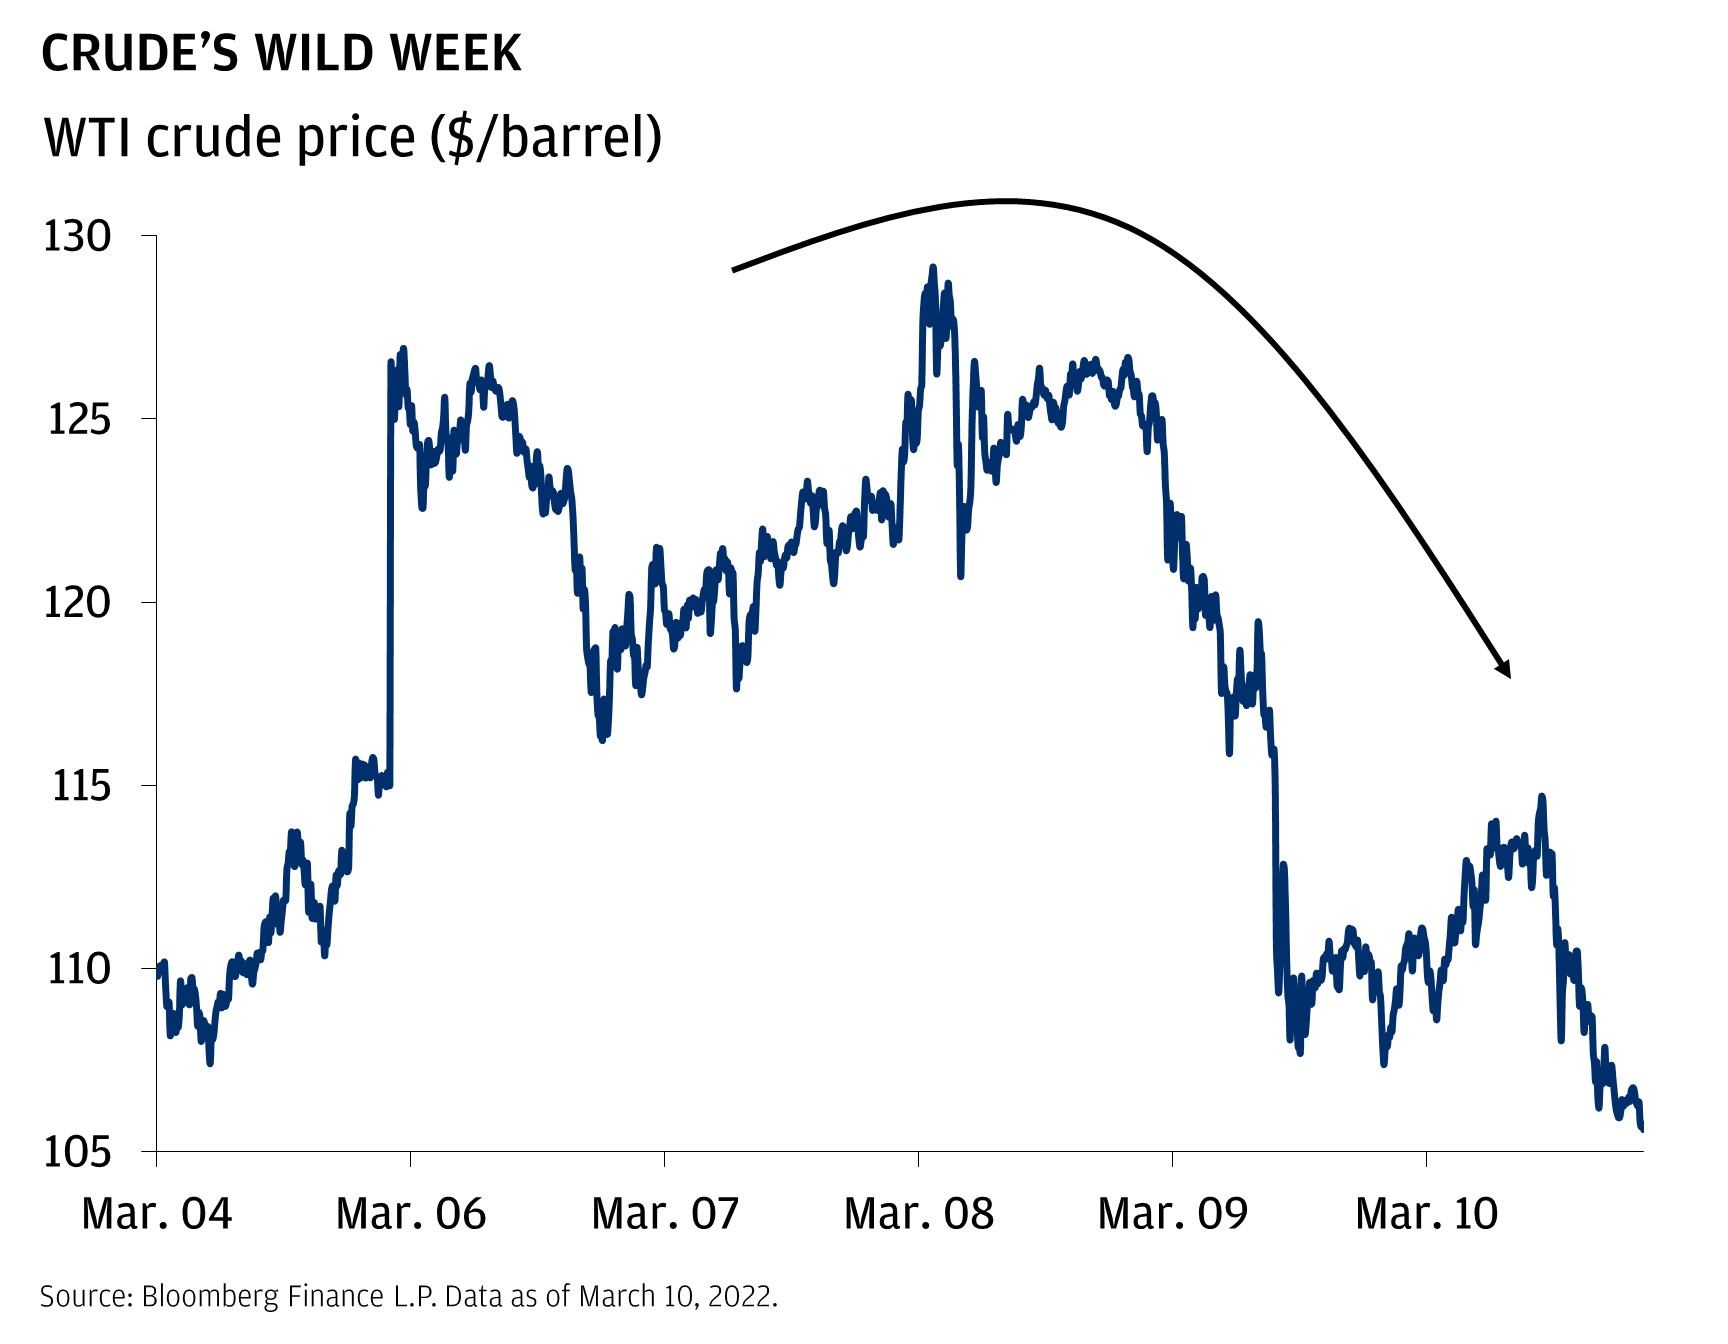 This chart shows the price of a barrel of WTI crude from March 4 to March 10, 2022. CRUDE’S WILD WEEK